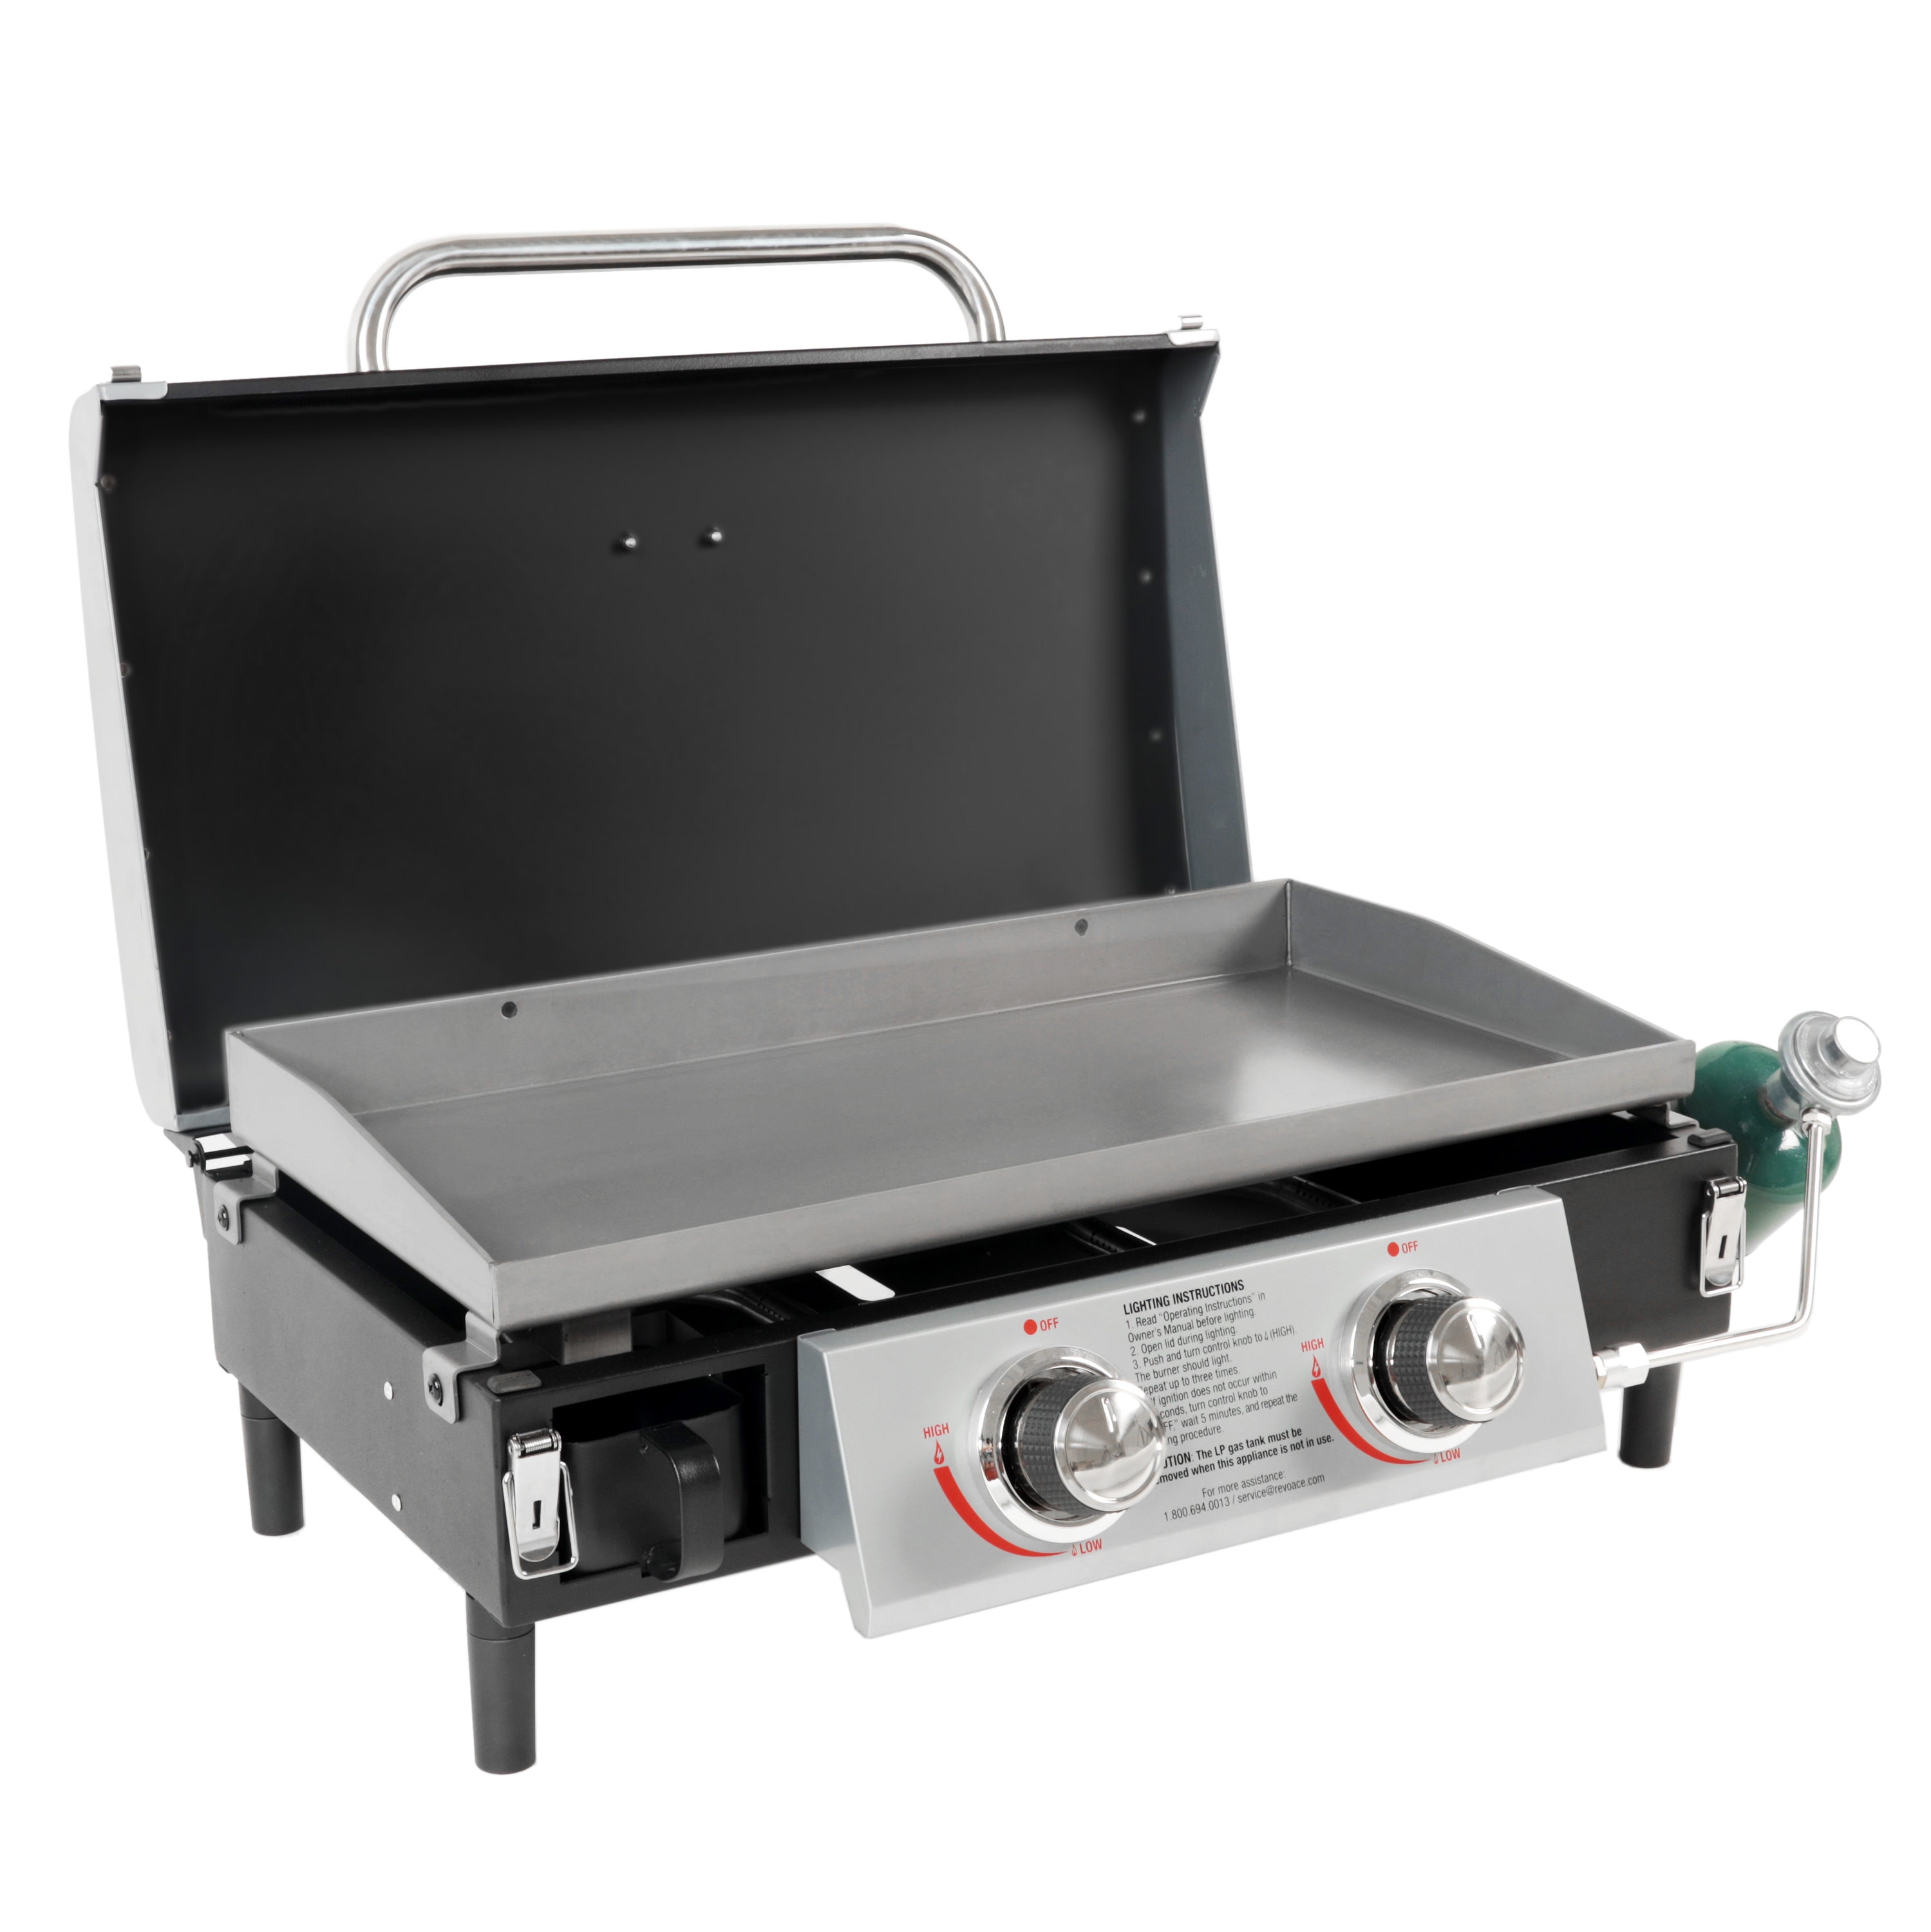 Razor 4 Burner Foldable Griddle and Grill Combo with Lid ,Black